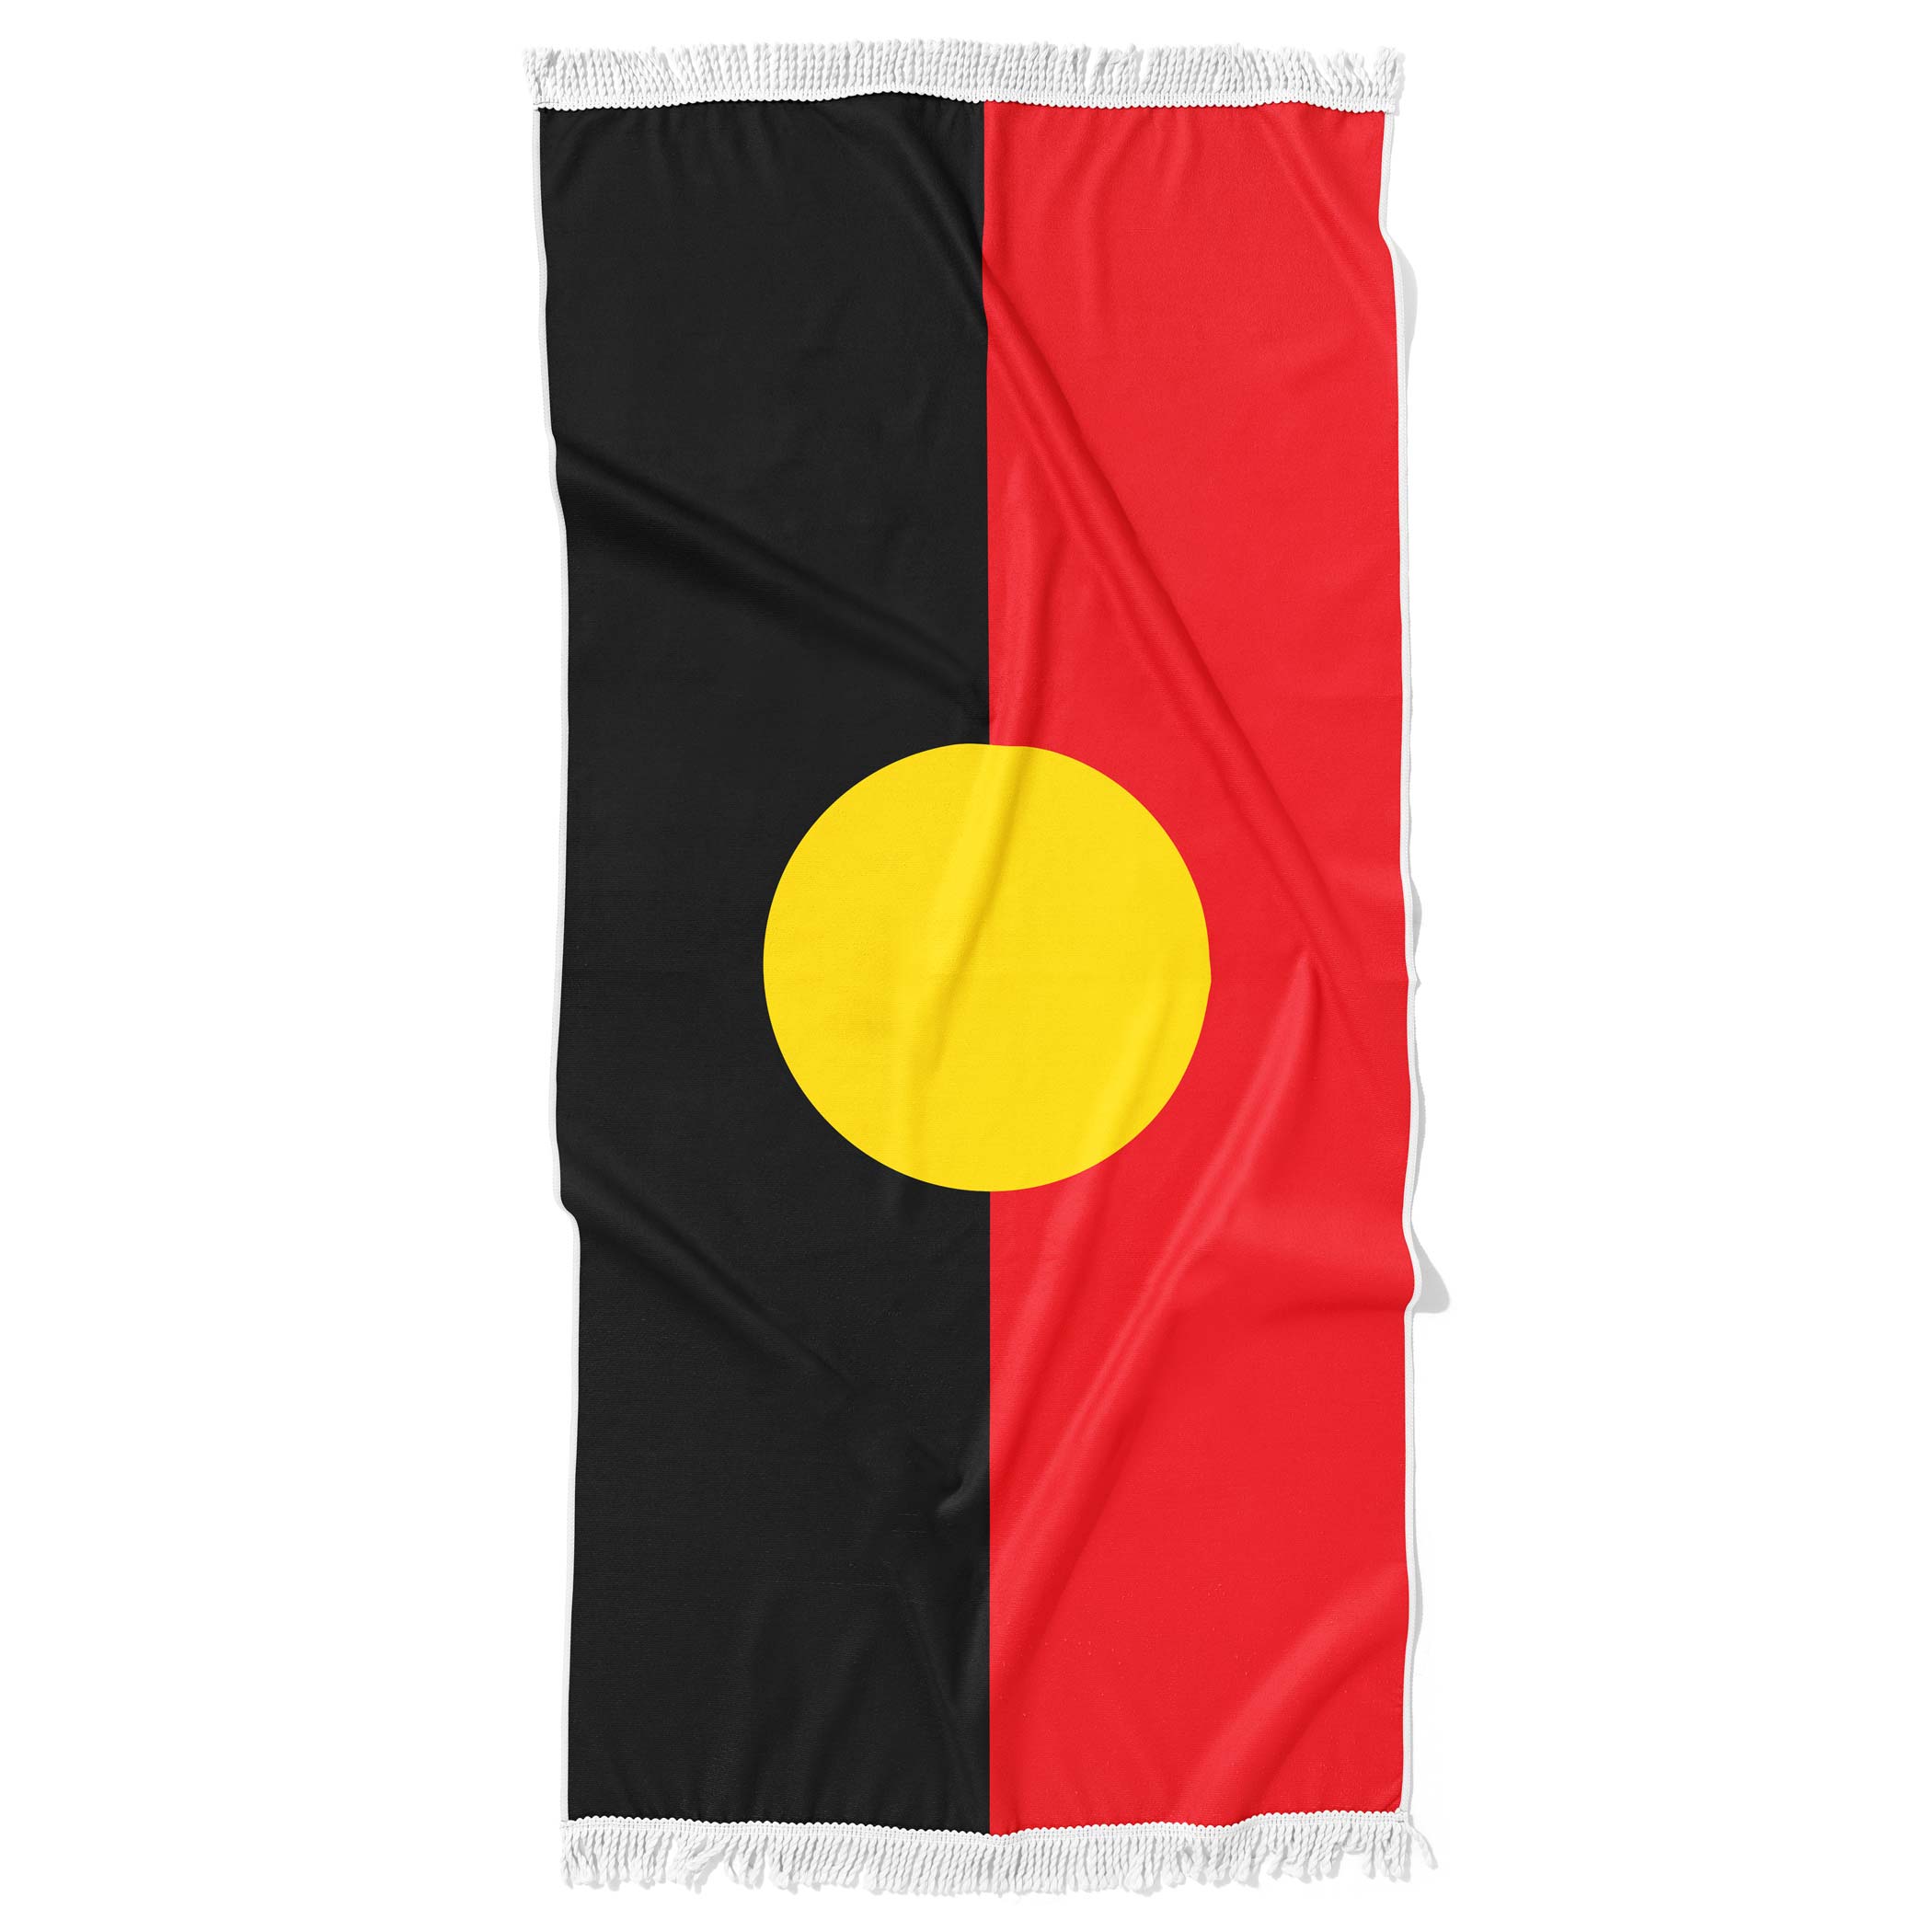 Buy Togo Flags From $64.95 & Get Same Day Dispatch!